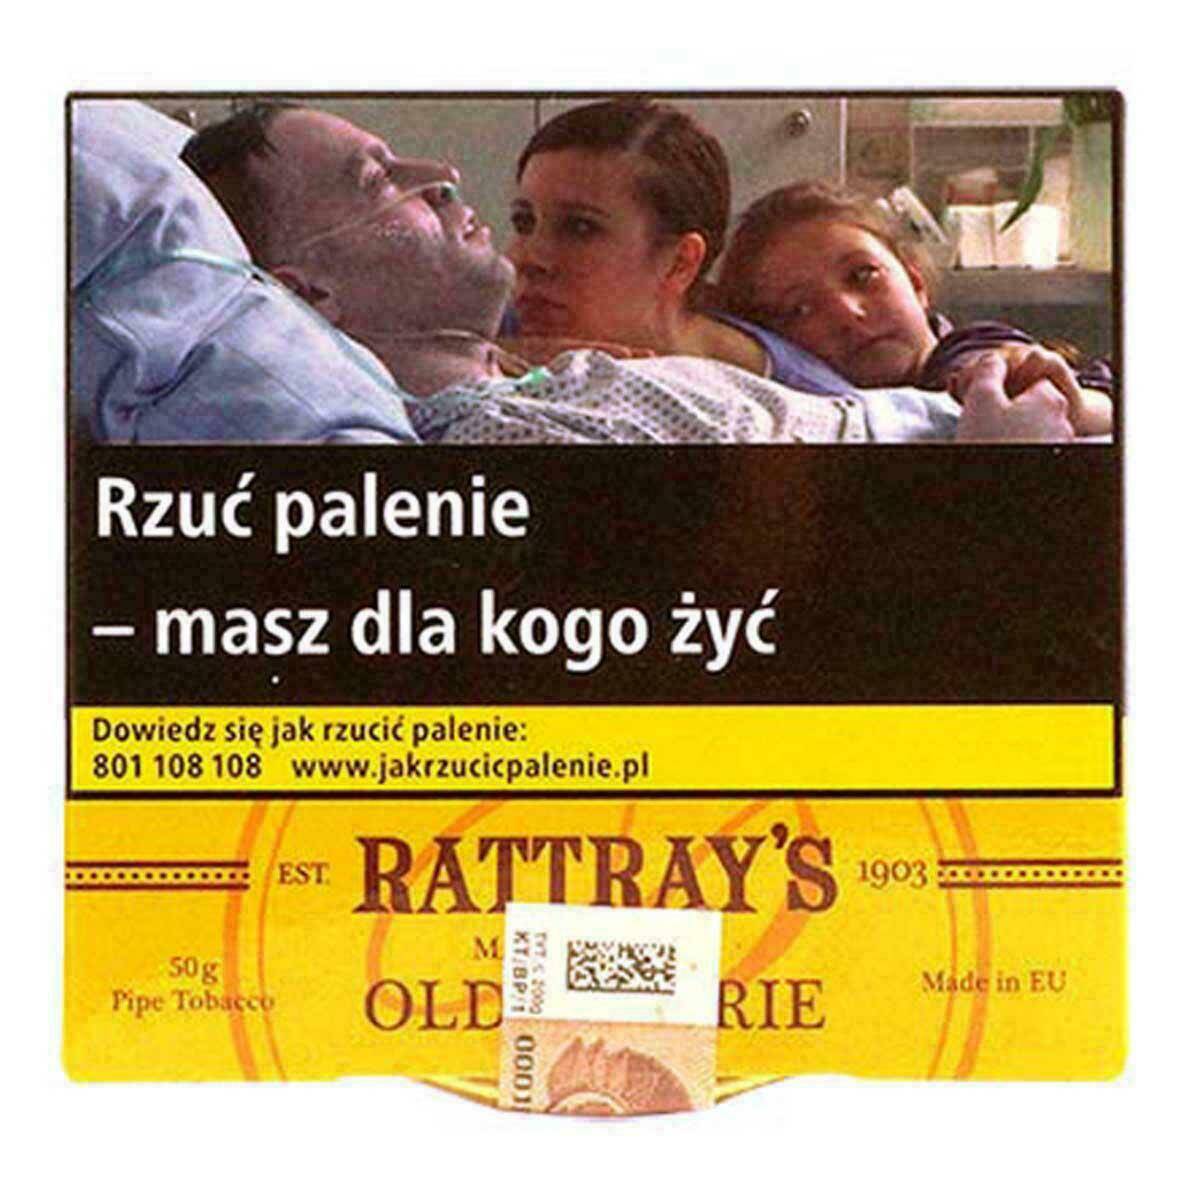 Tobacco Rattray Old Gowrie 50g (79,90)